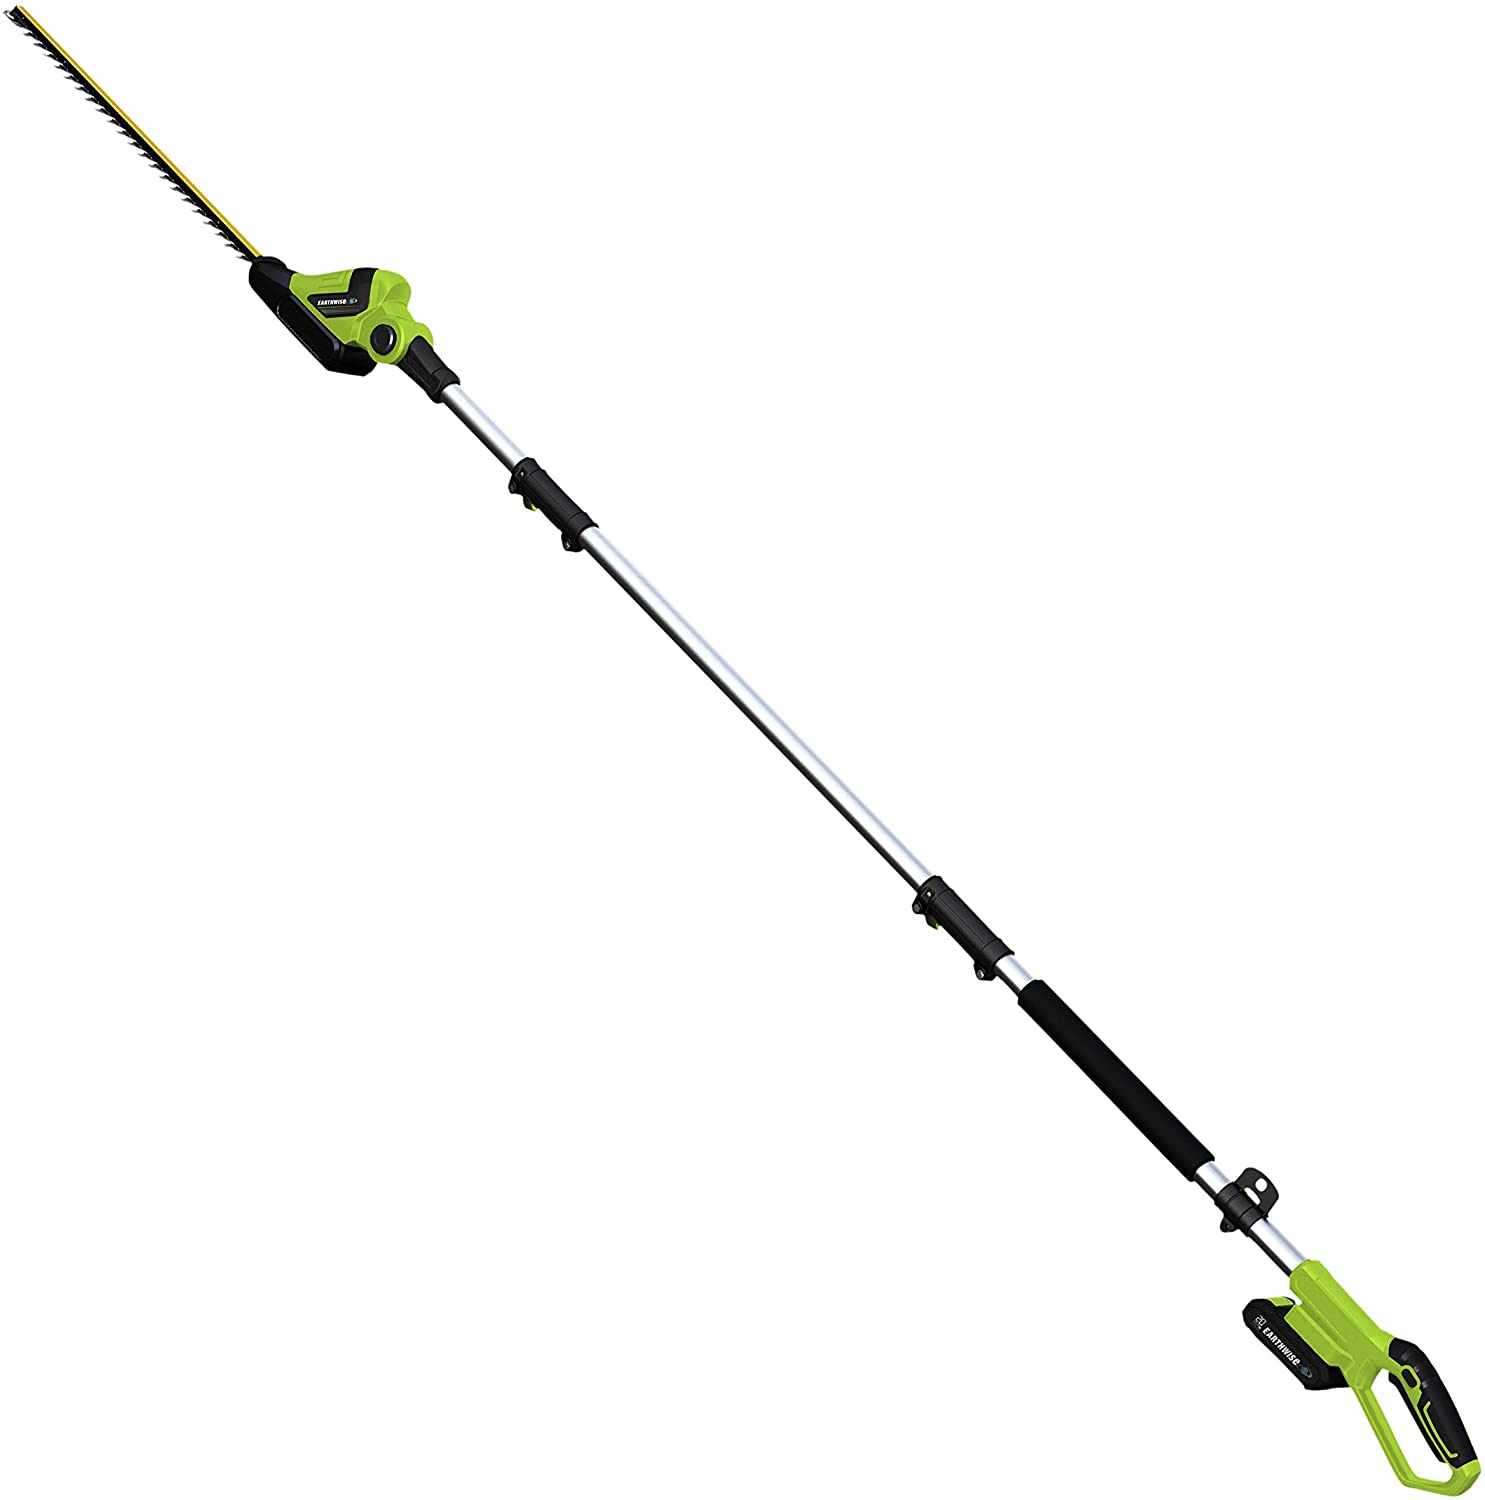 Earthwise LPHT12022 20-Inch Cordless Pole Hedge Trimmer